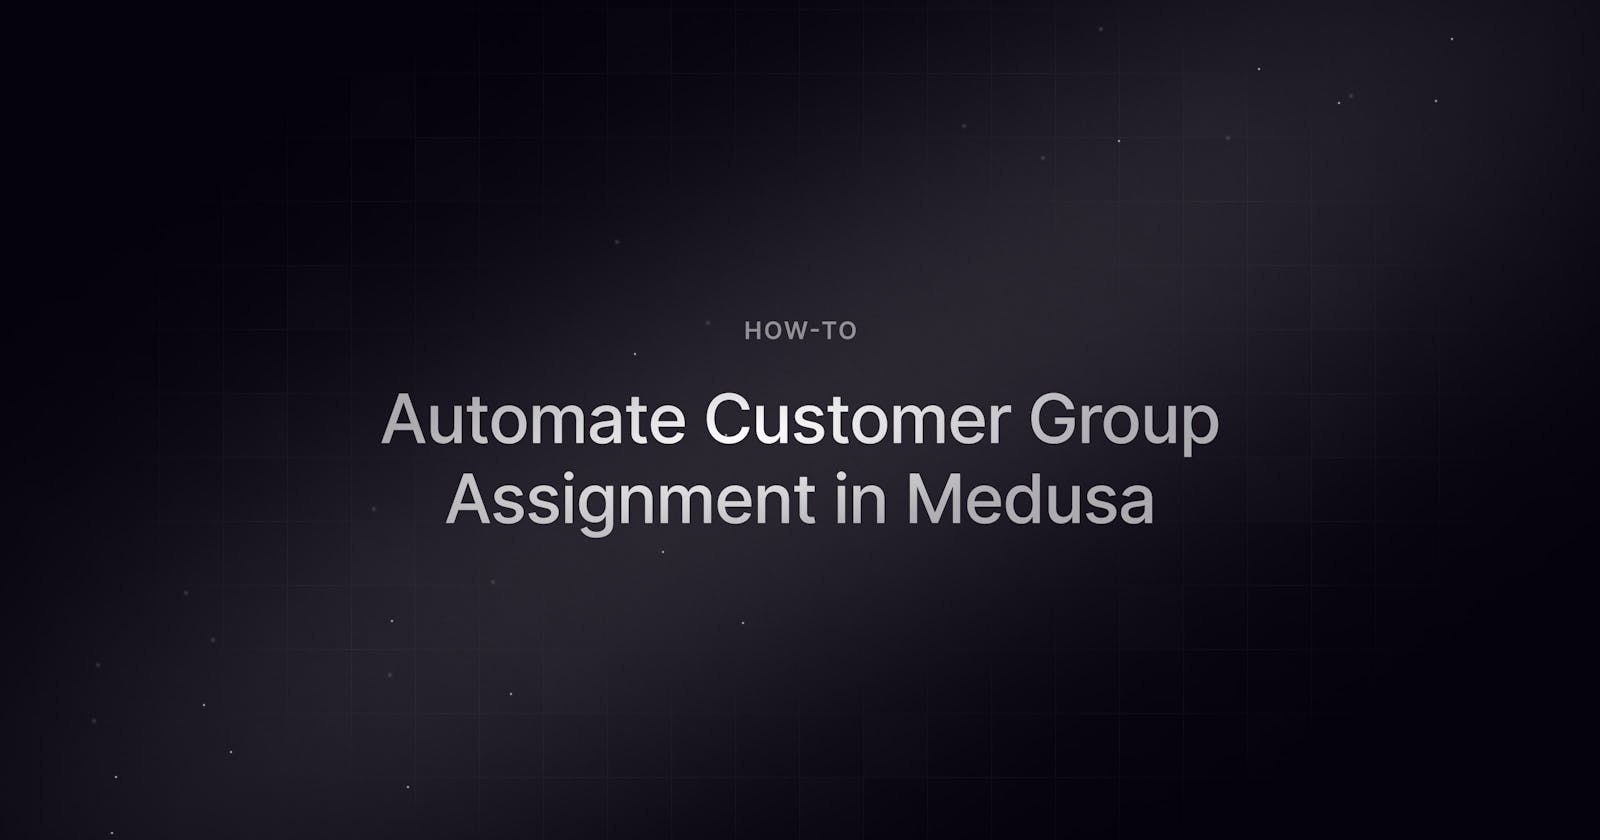 Ecommerce Automation: Automate Customer Group Assignment in Medusa